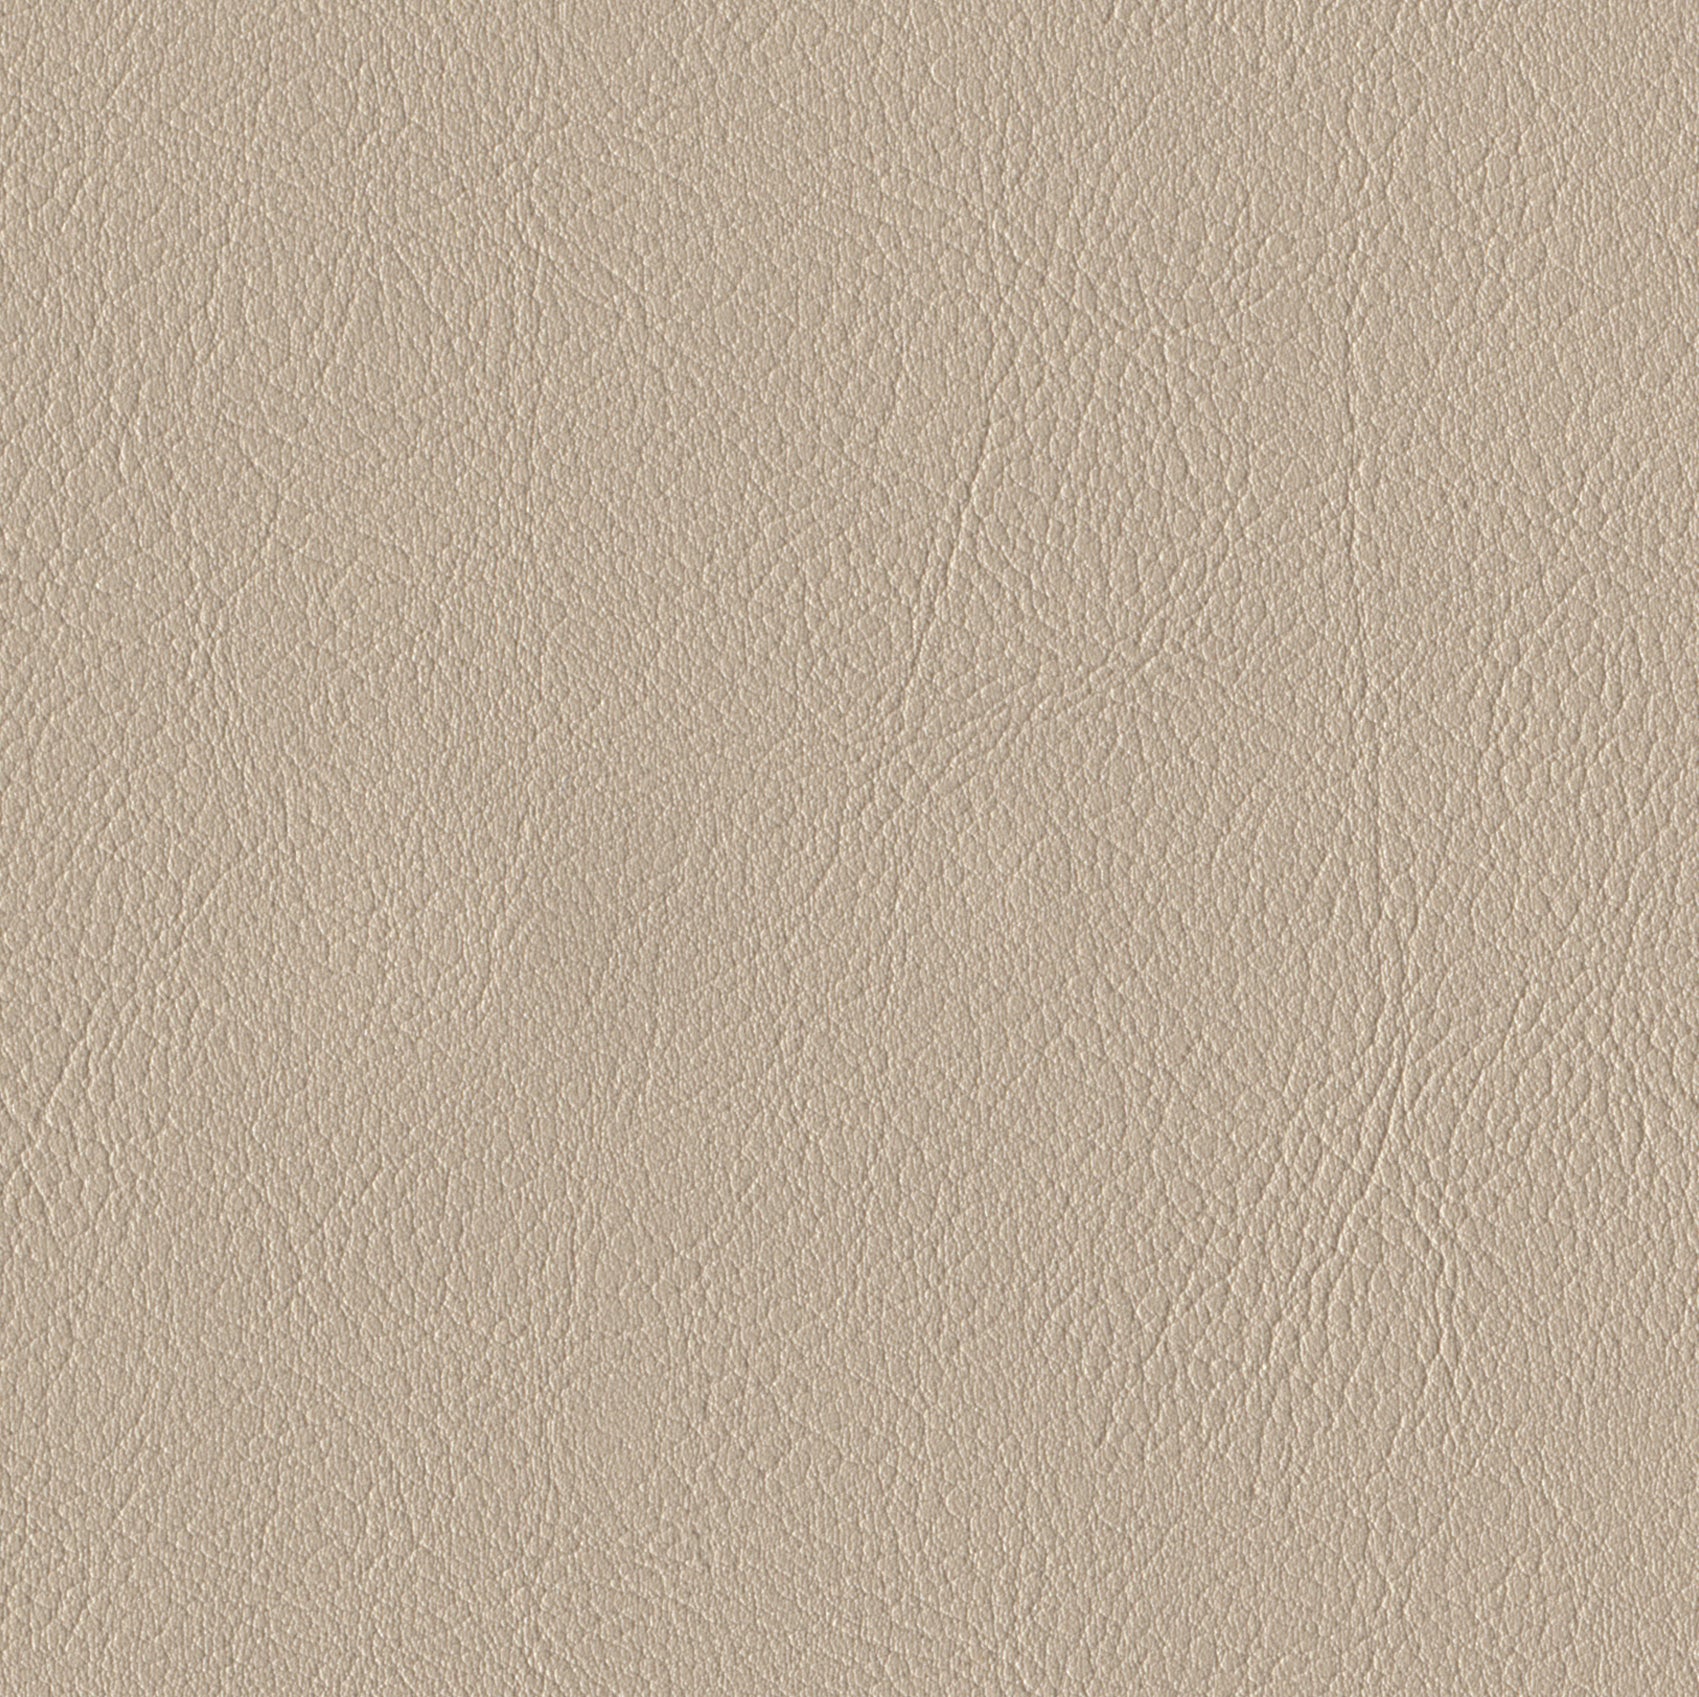    Andriali-Contract-Vinyl_Upholstery-Design-LegacyFR-Color-022Sand-Width-140cm